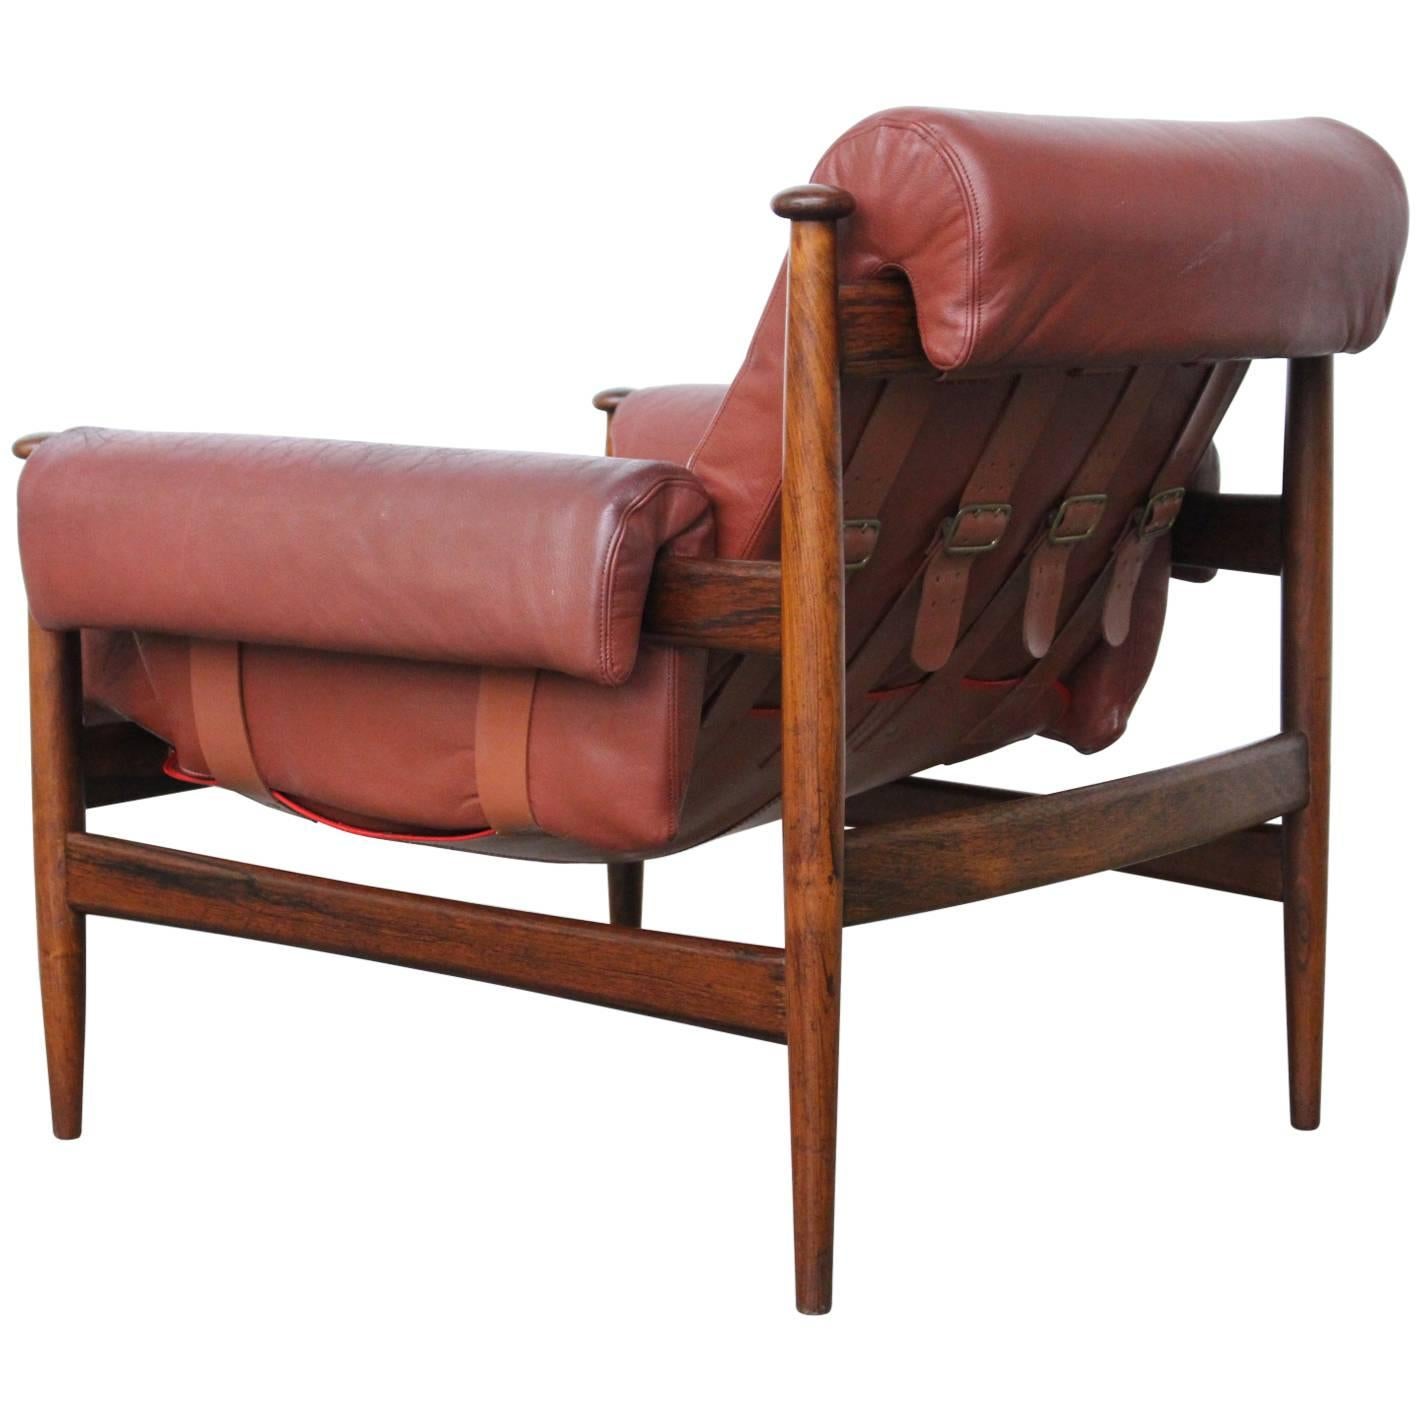 Beautifully sculpted lounge armchairmodel Amiral by Erik Merthen for Ire Møbler, Sweden, 1964. Made of solid rosewood and thick Bordeaux-red leather cushions, all in excellent condition. The tension of the backrest is variable by means of buckled